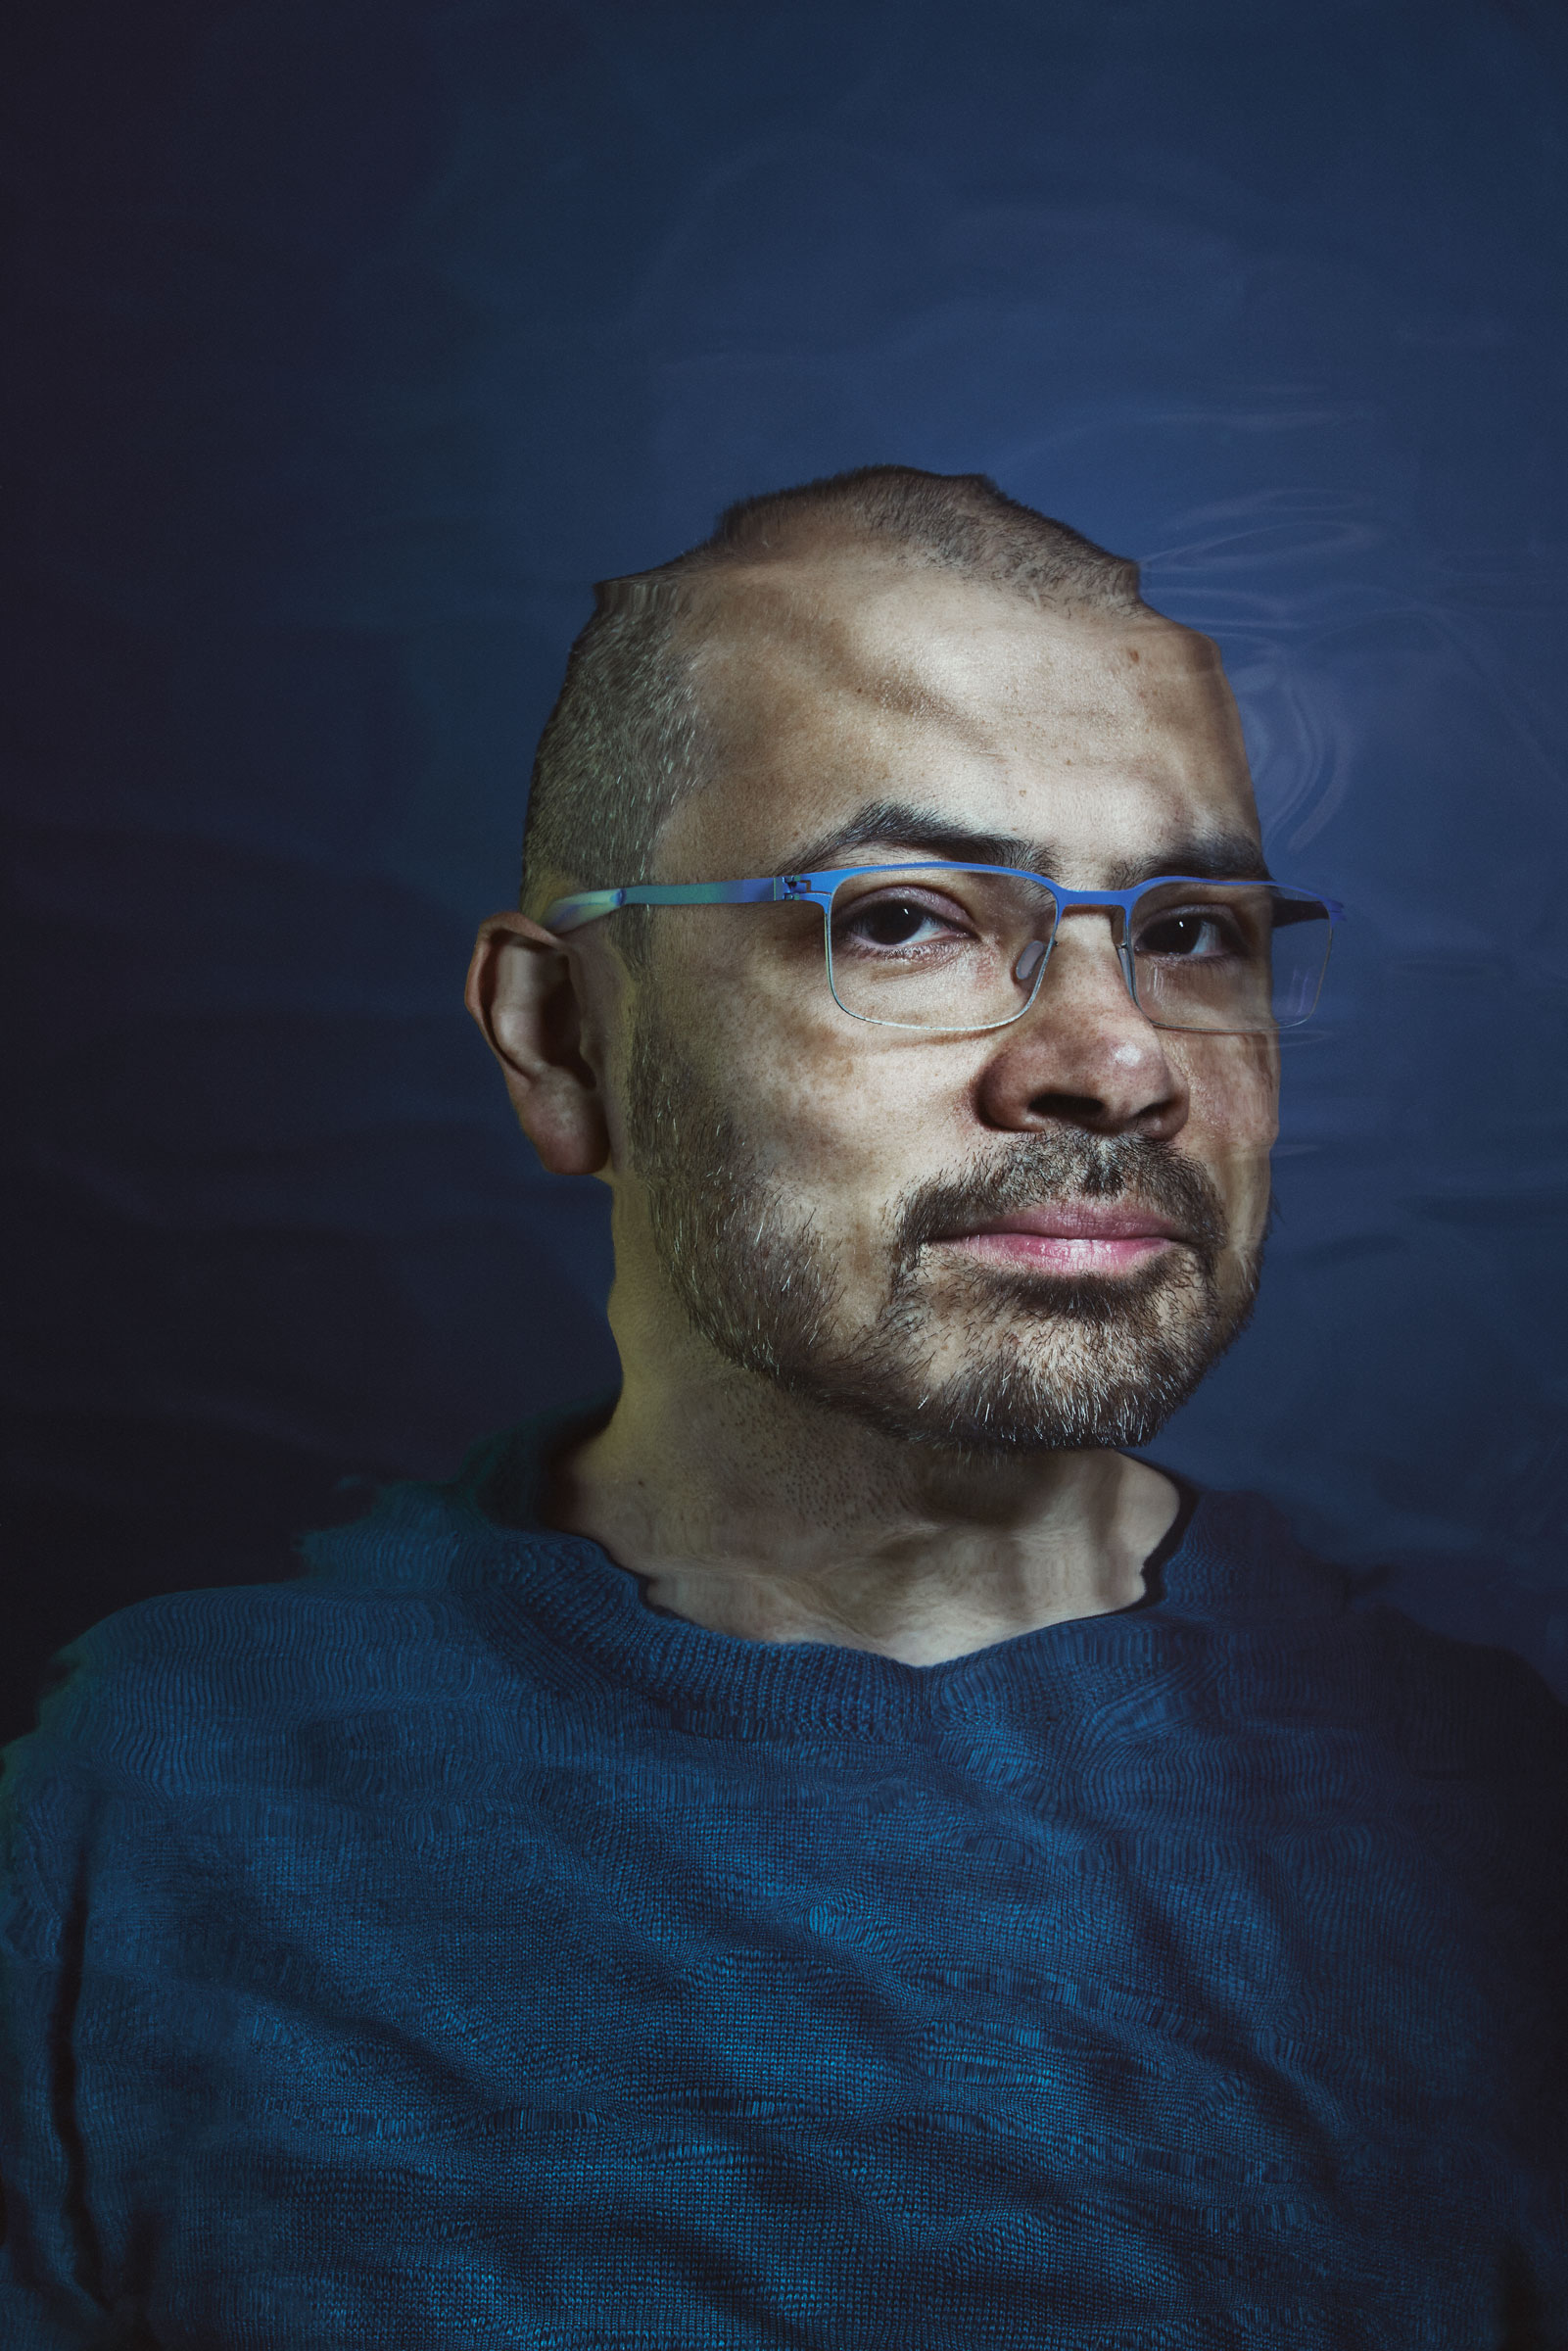 Demis Hassabis at DeepMind’s headquarters in London on Nov. 3, 2022